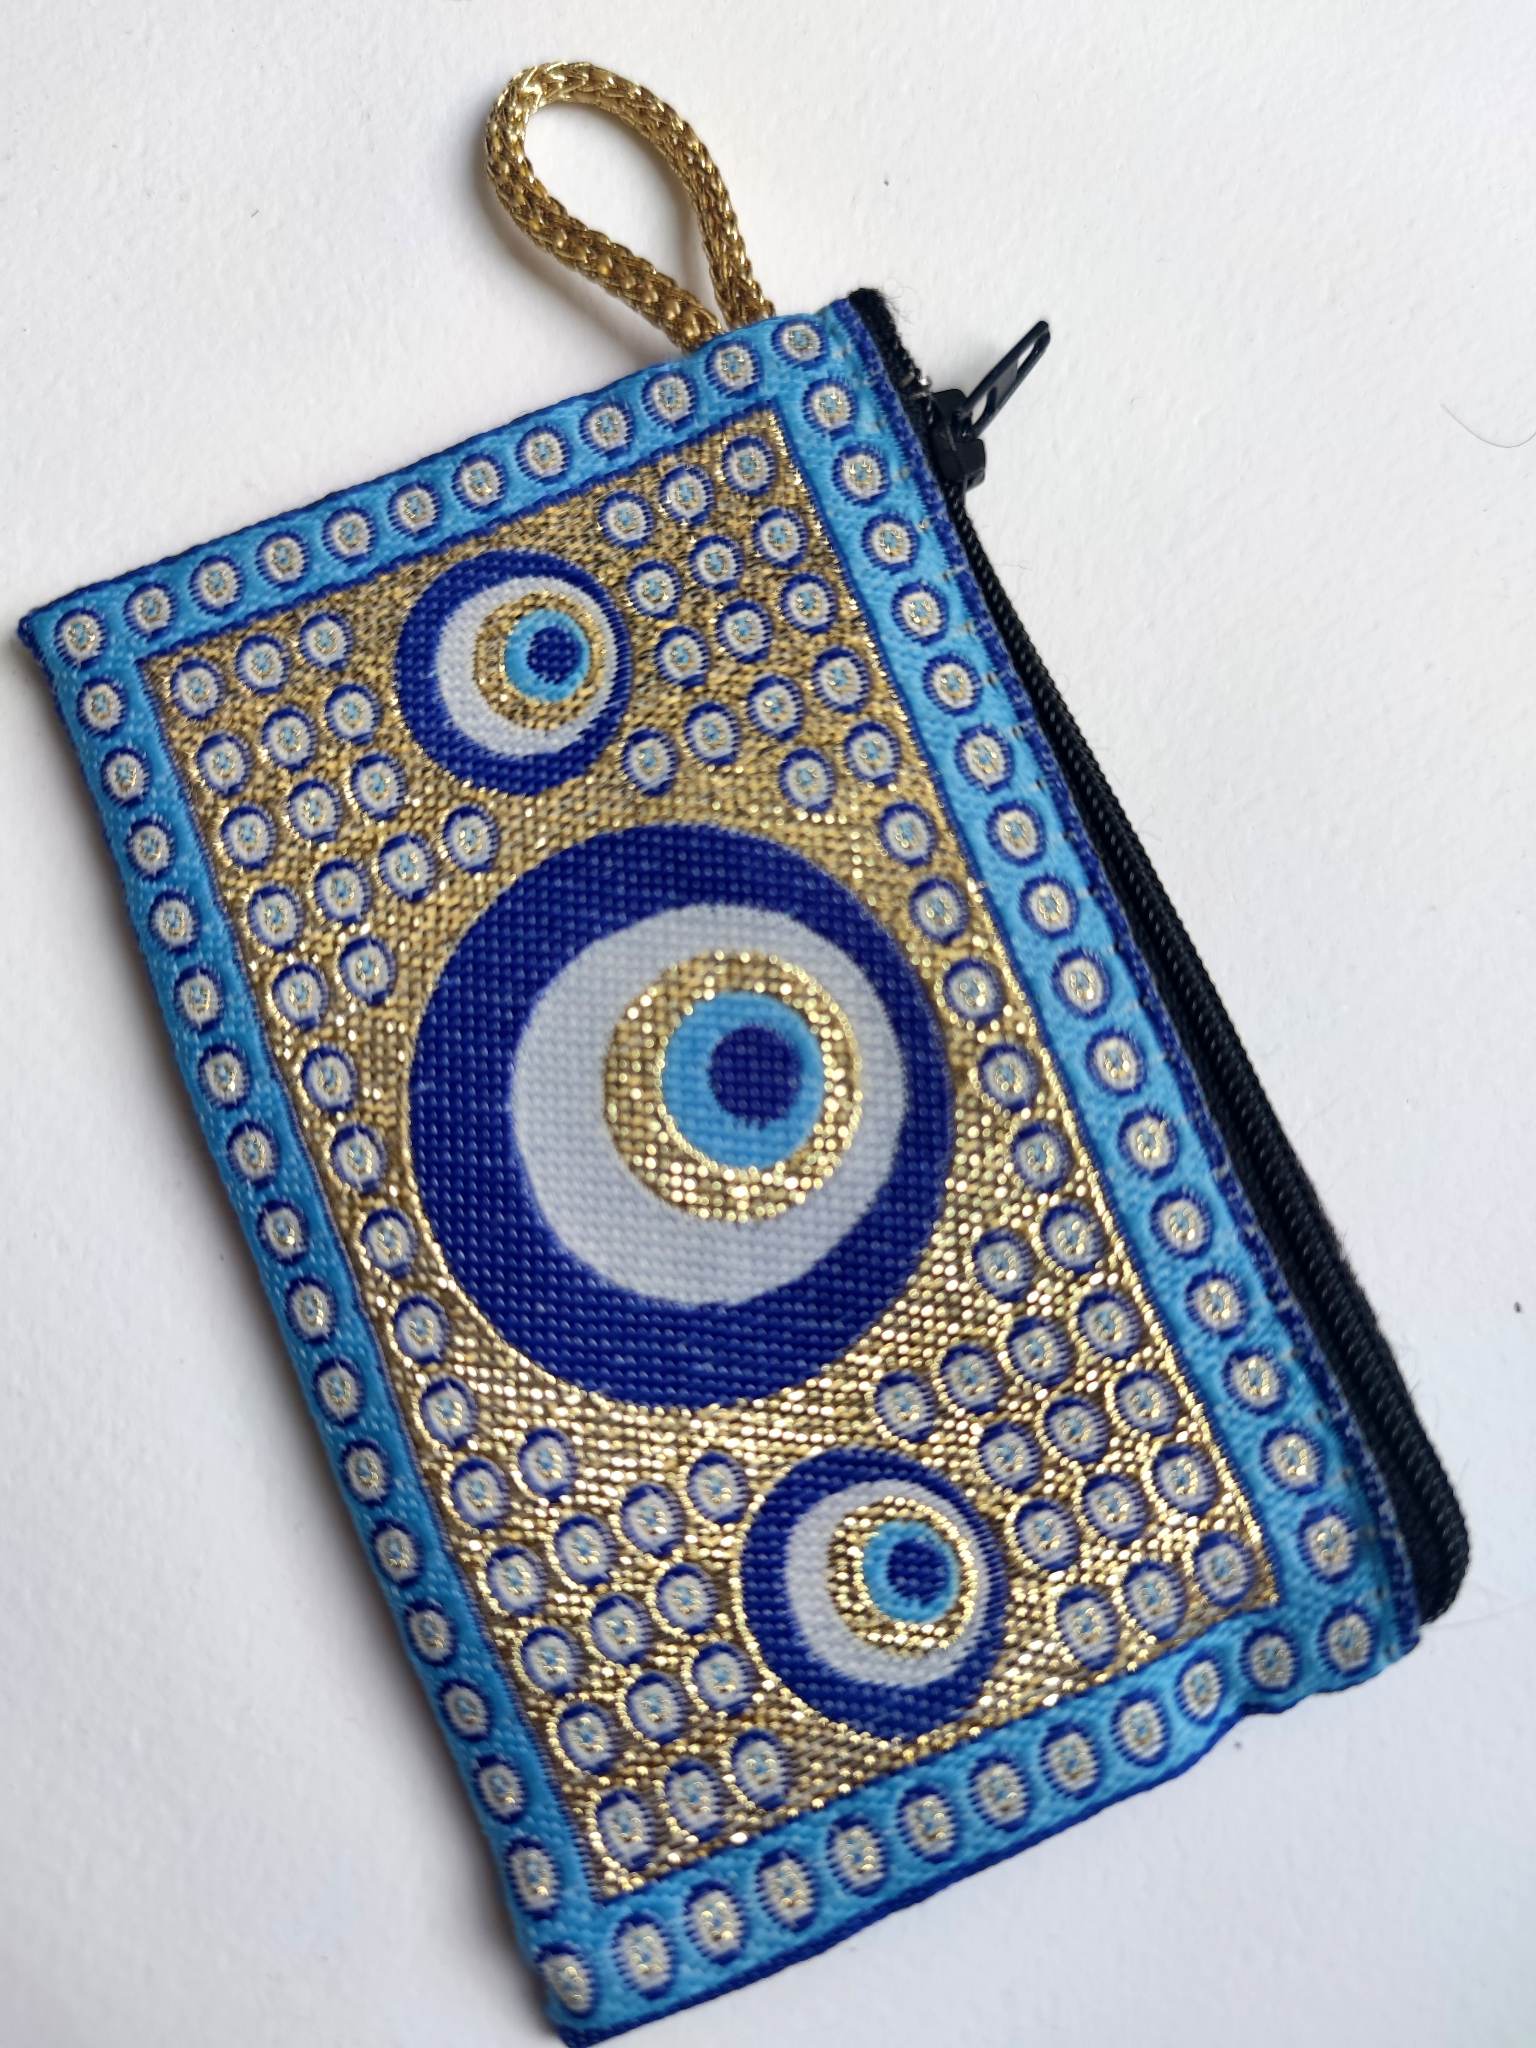 Small magical zipper pouch for jewelry or mojo bags with protection symbols - Evil eye Nazar